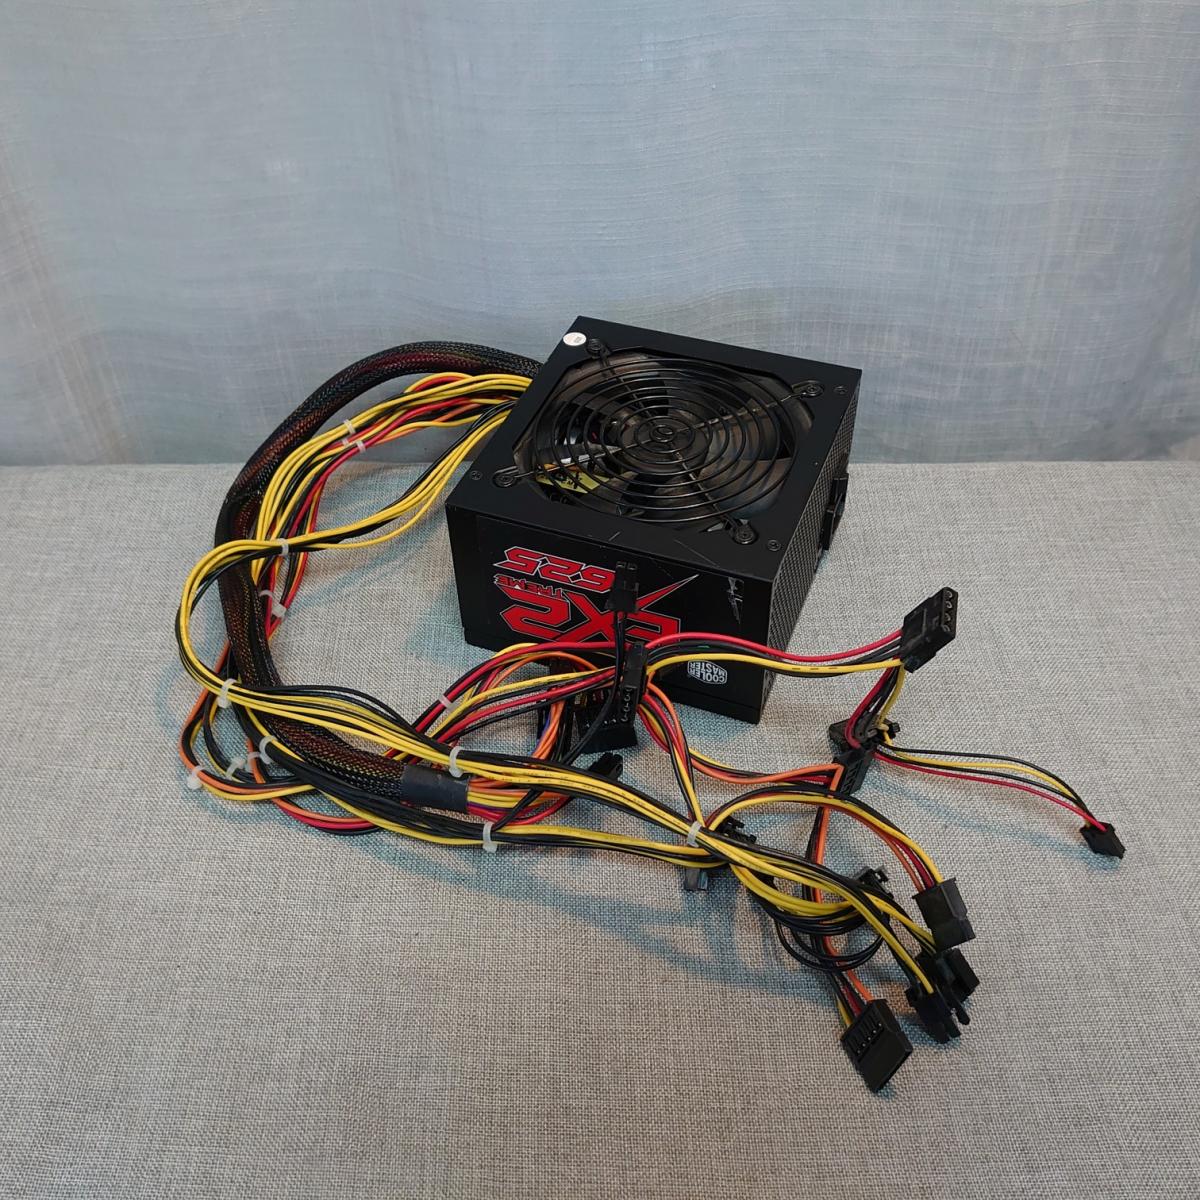 Assorted 600-650W power supply